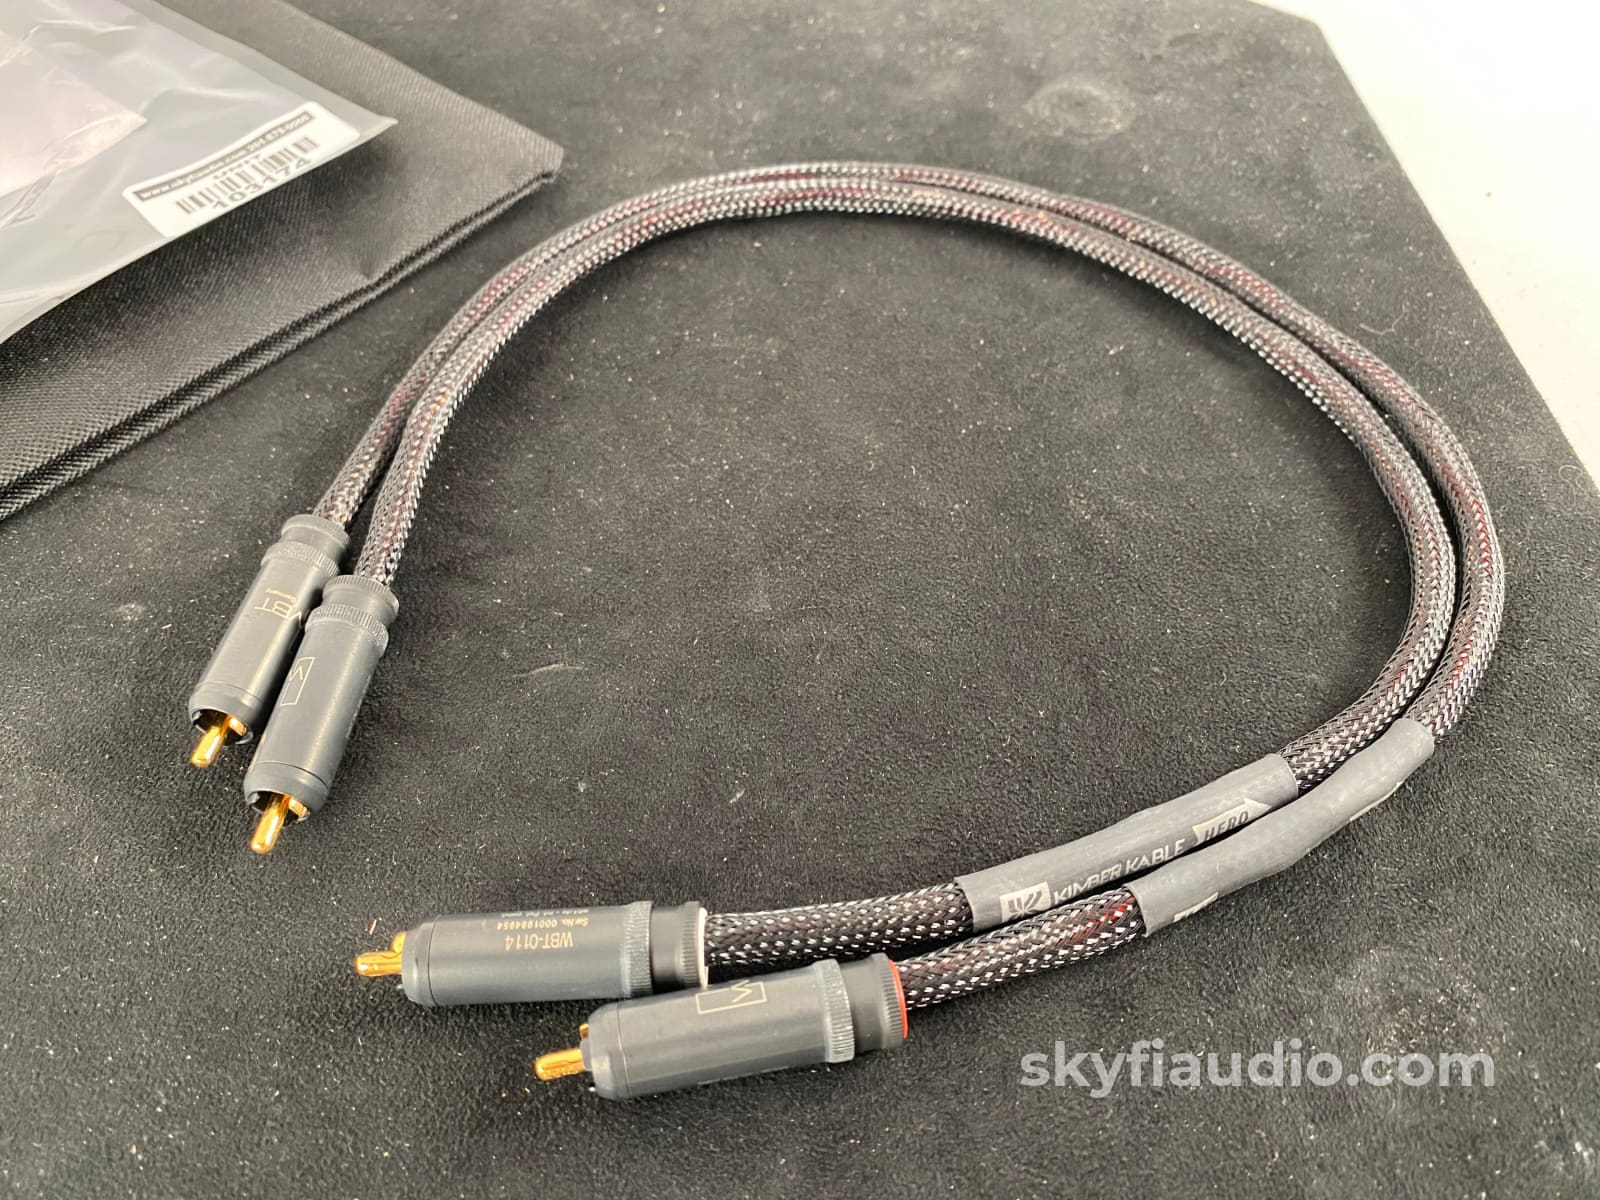 Kimber Kable - Hero Rca Cables With Wbt Connectors 0.5M New